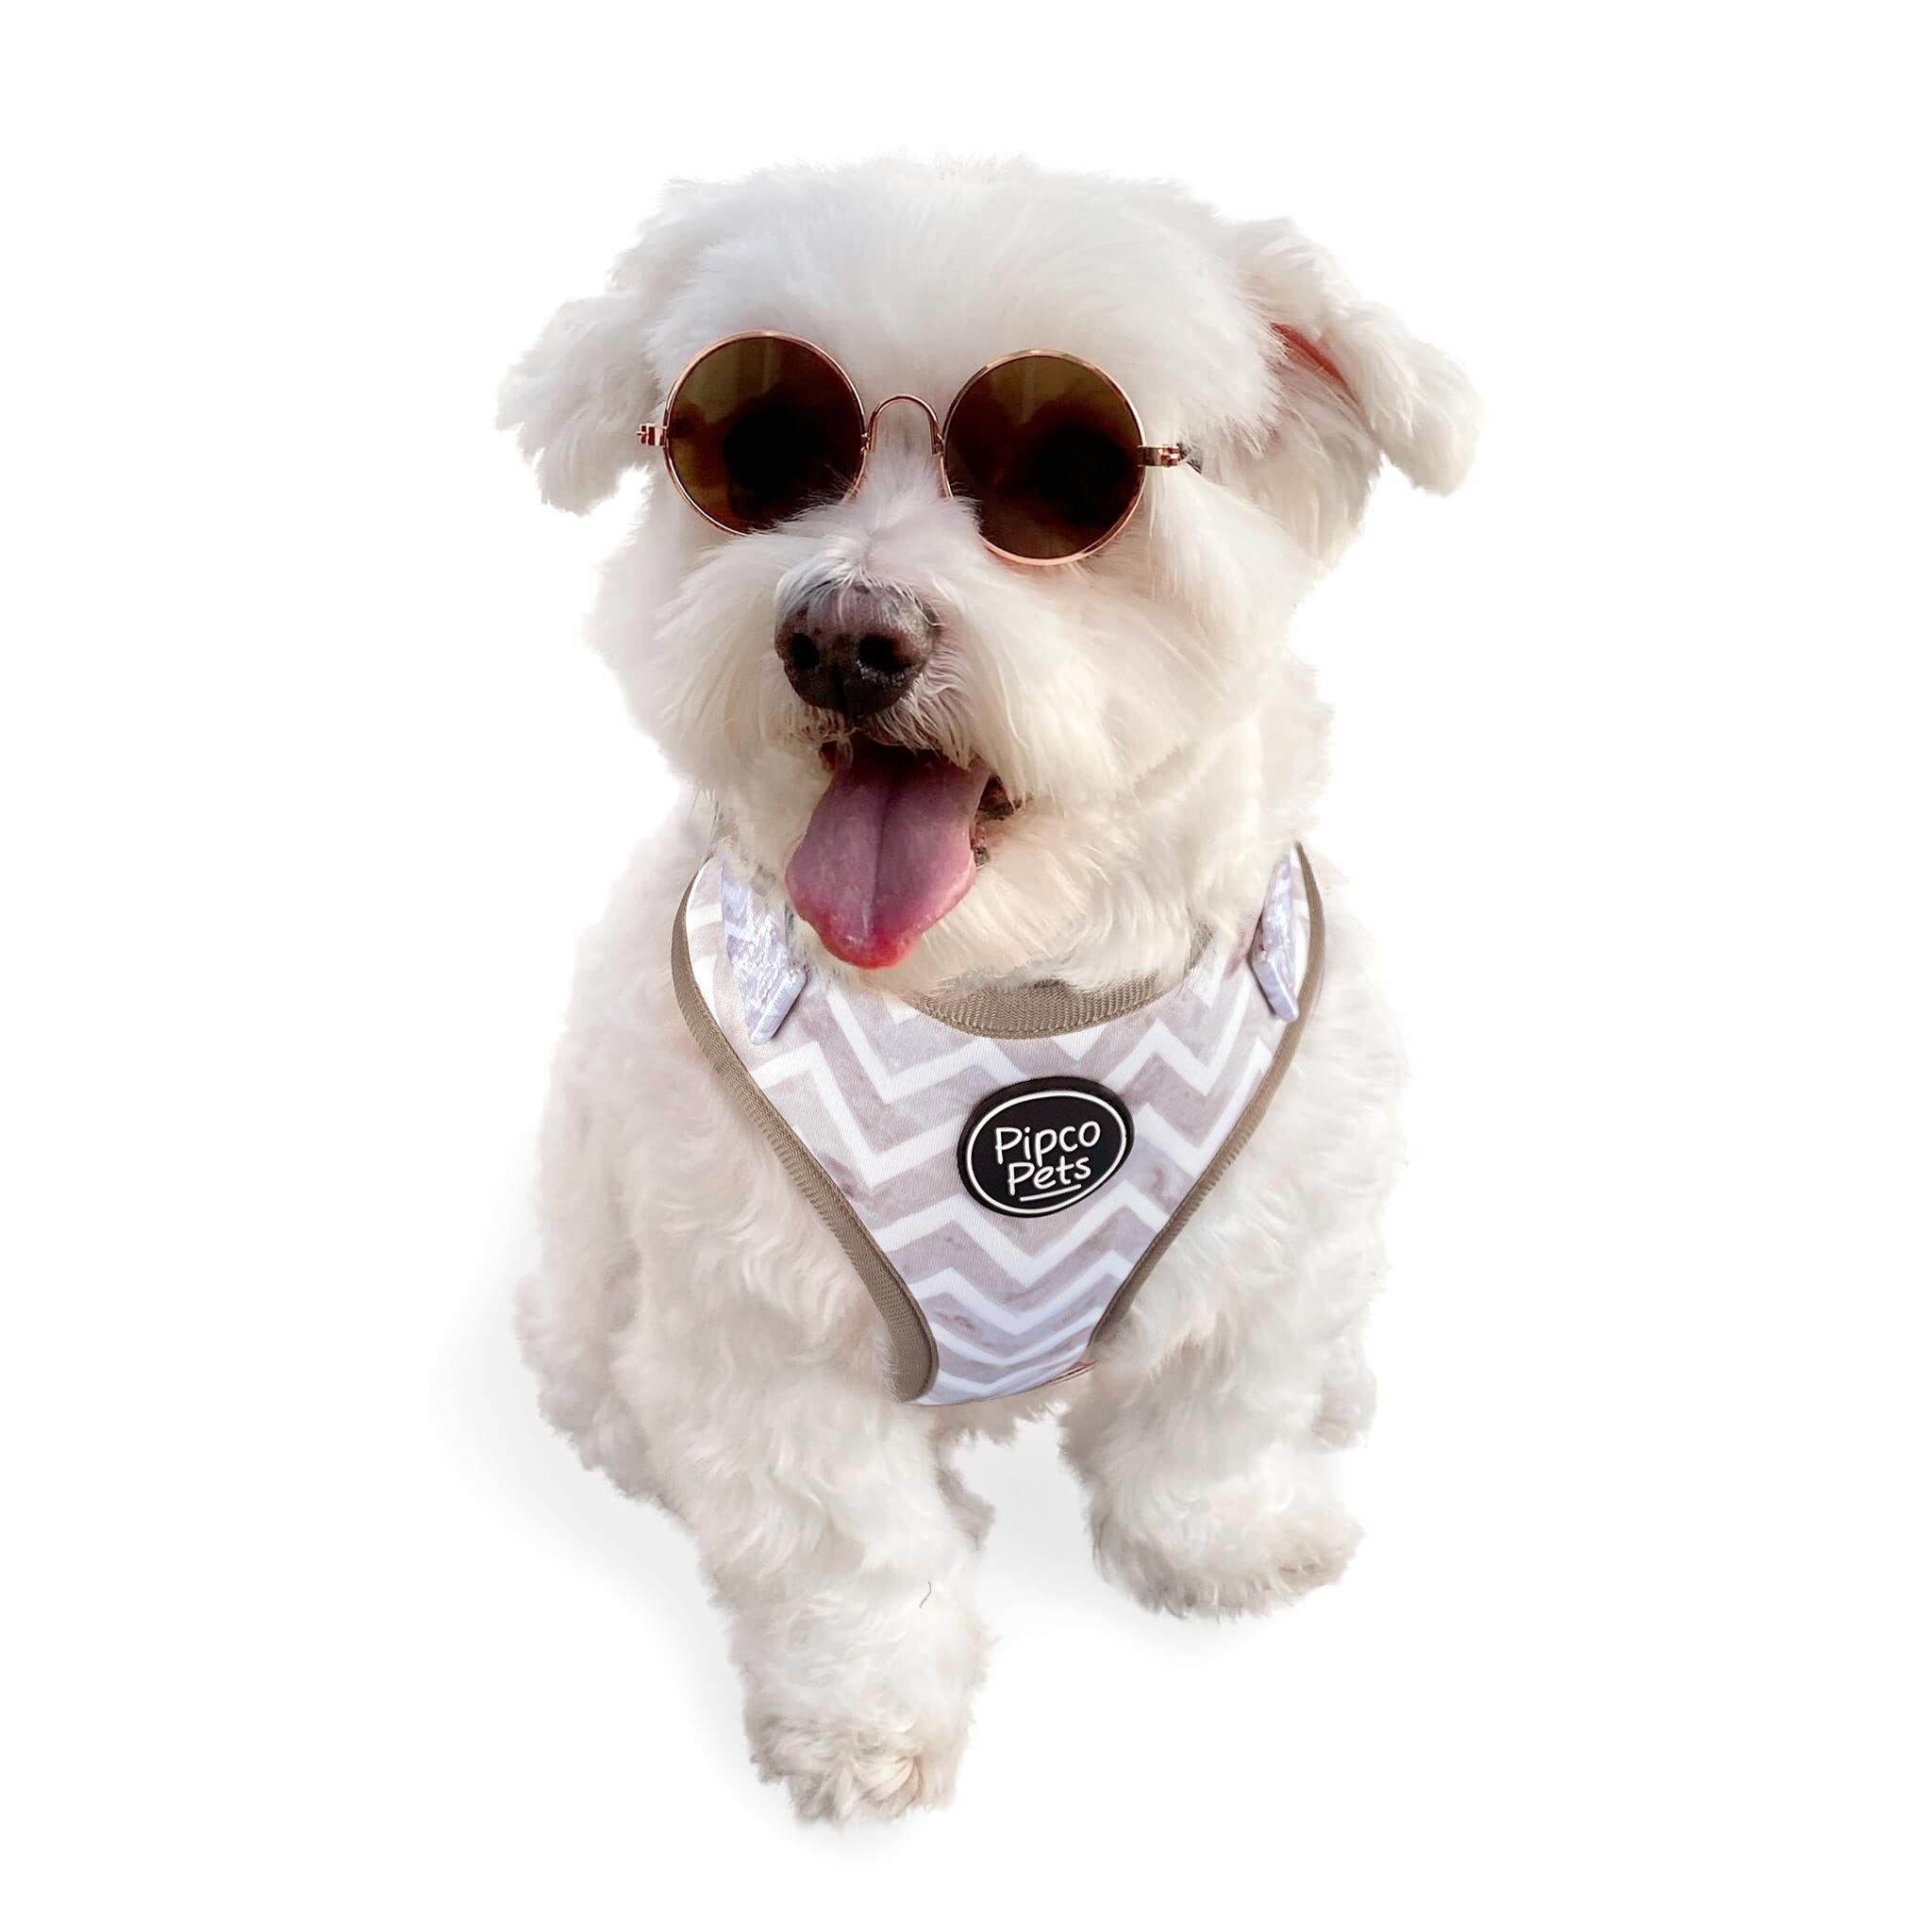 Cute dog wearing sunglasses and Pipco Pets adjustable harness with Gettin' Ziggy zig zags print pattern in grey